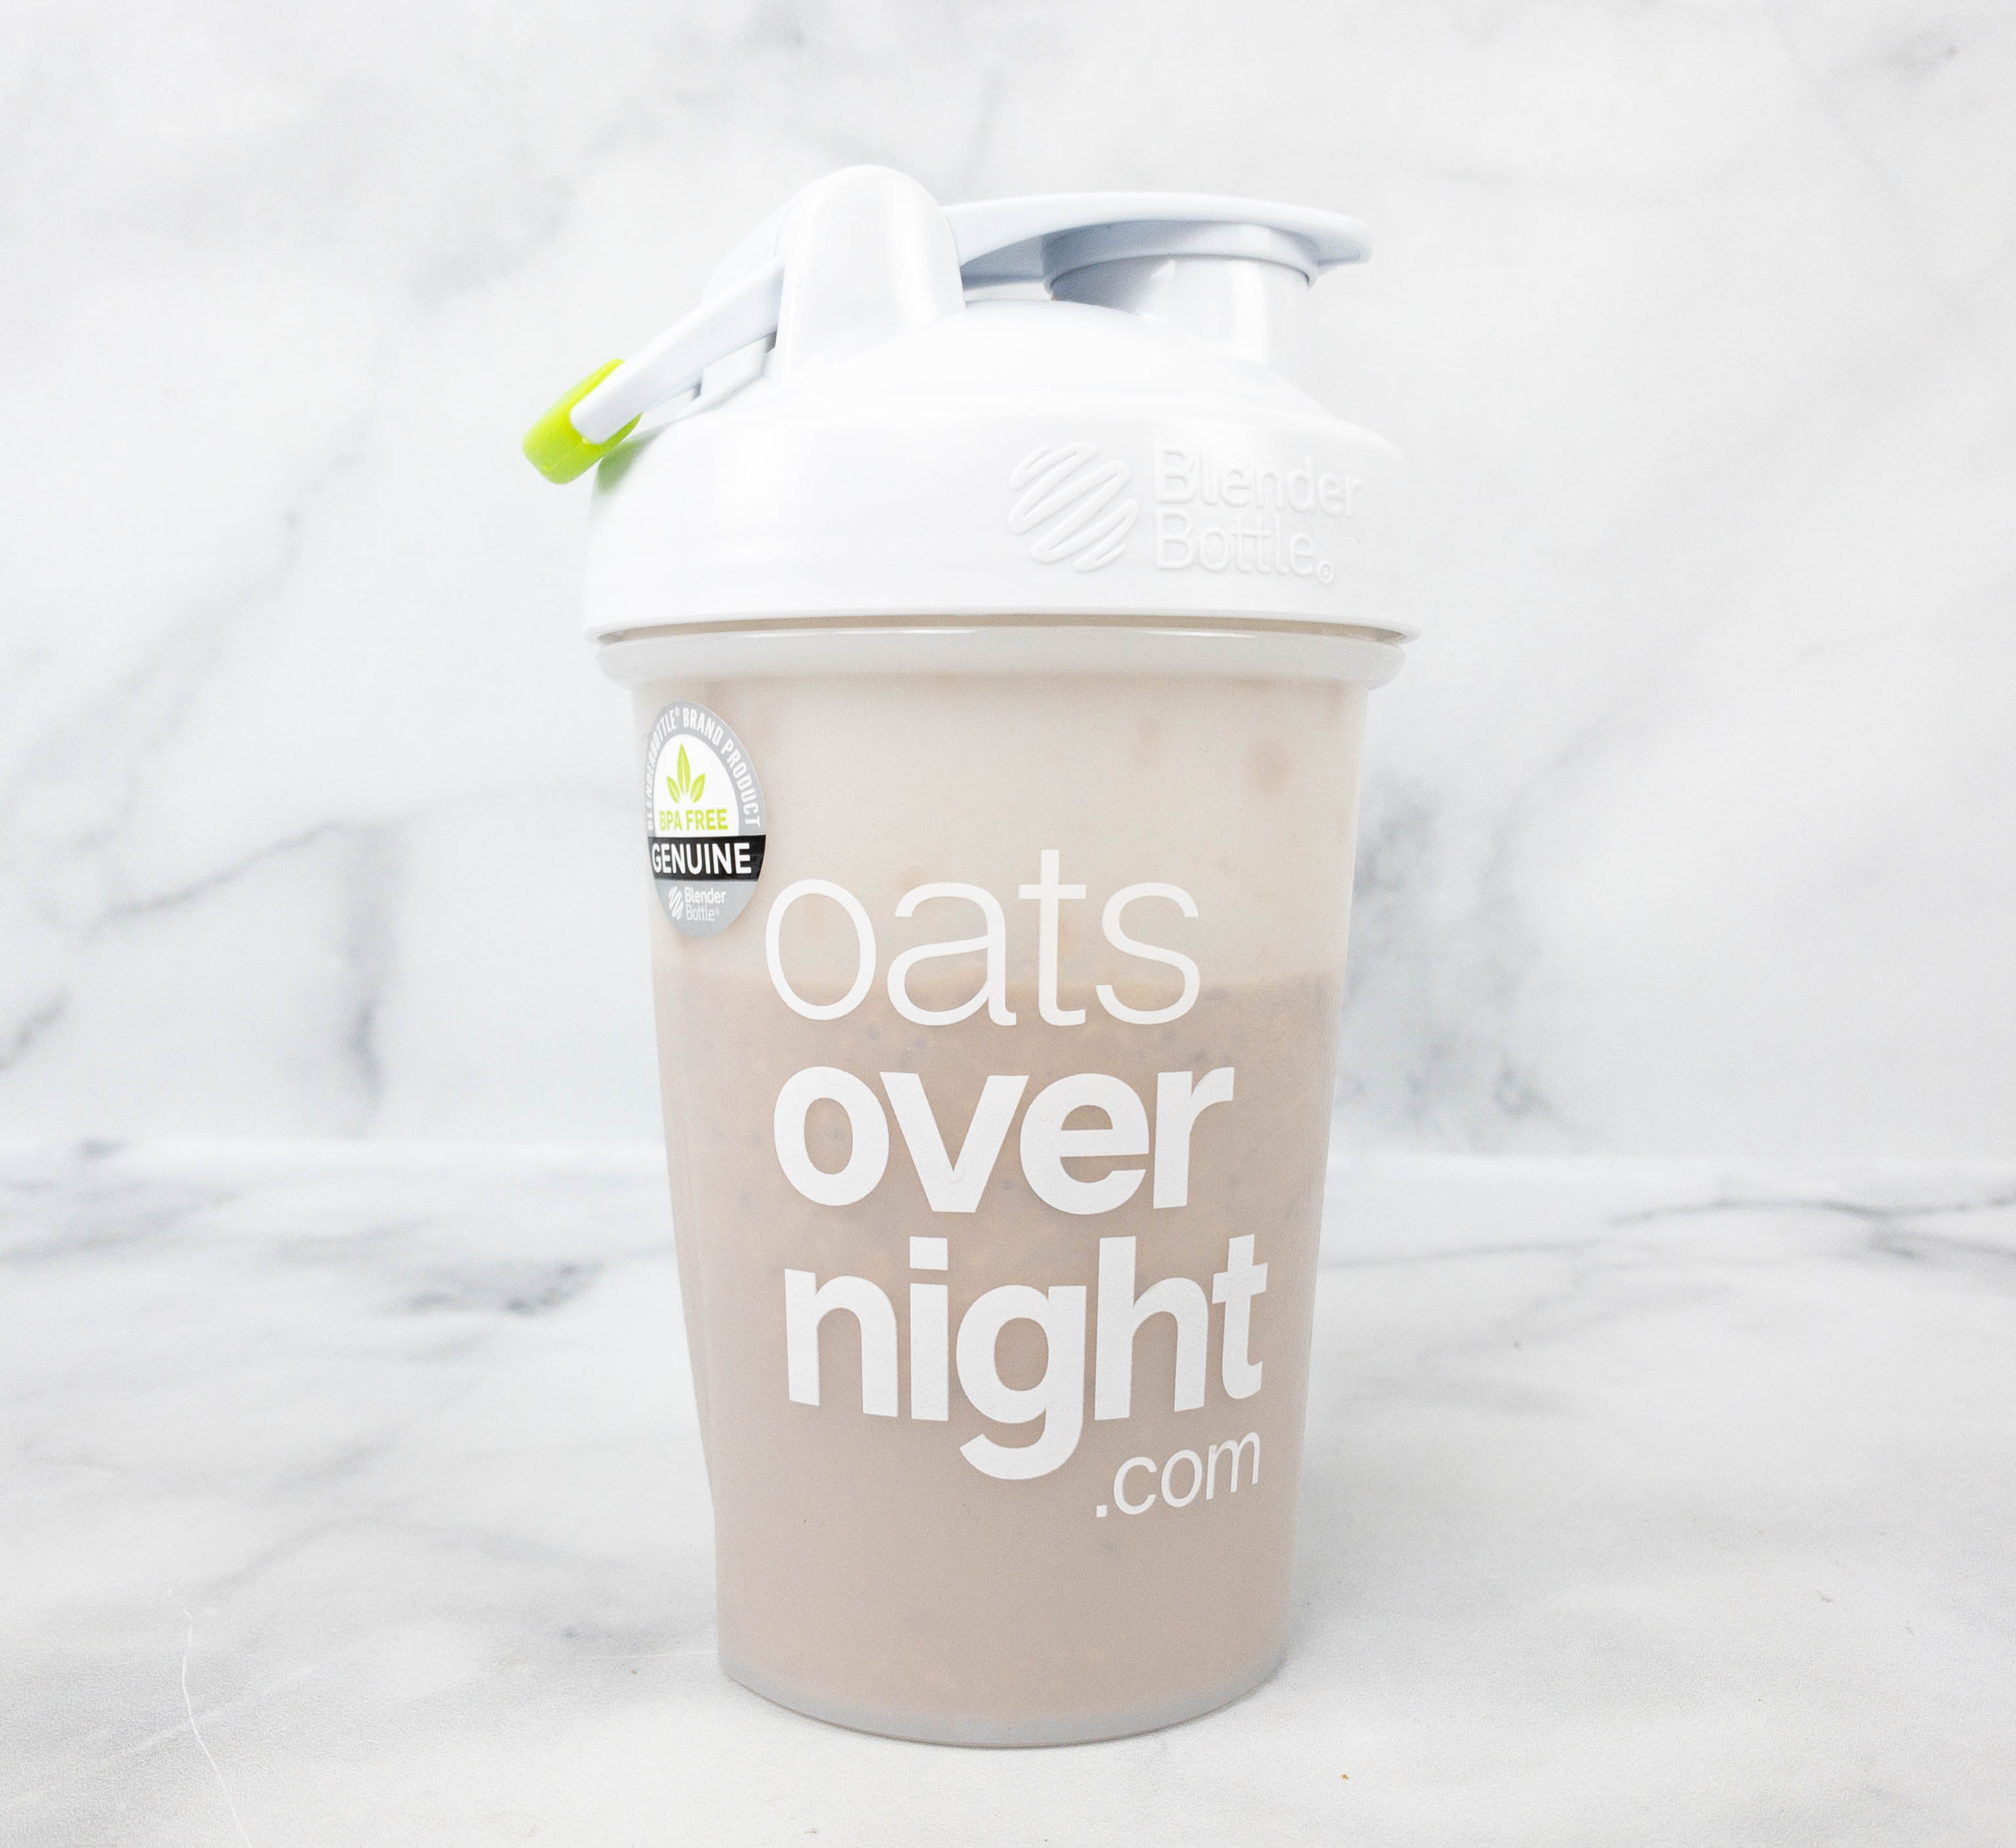 https://hellosubscription.com/wp-content/uploads/2021/05/oats-overnight-review-44.jpg?quality=90&strip=all